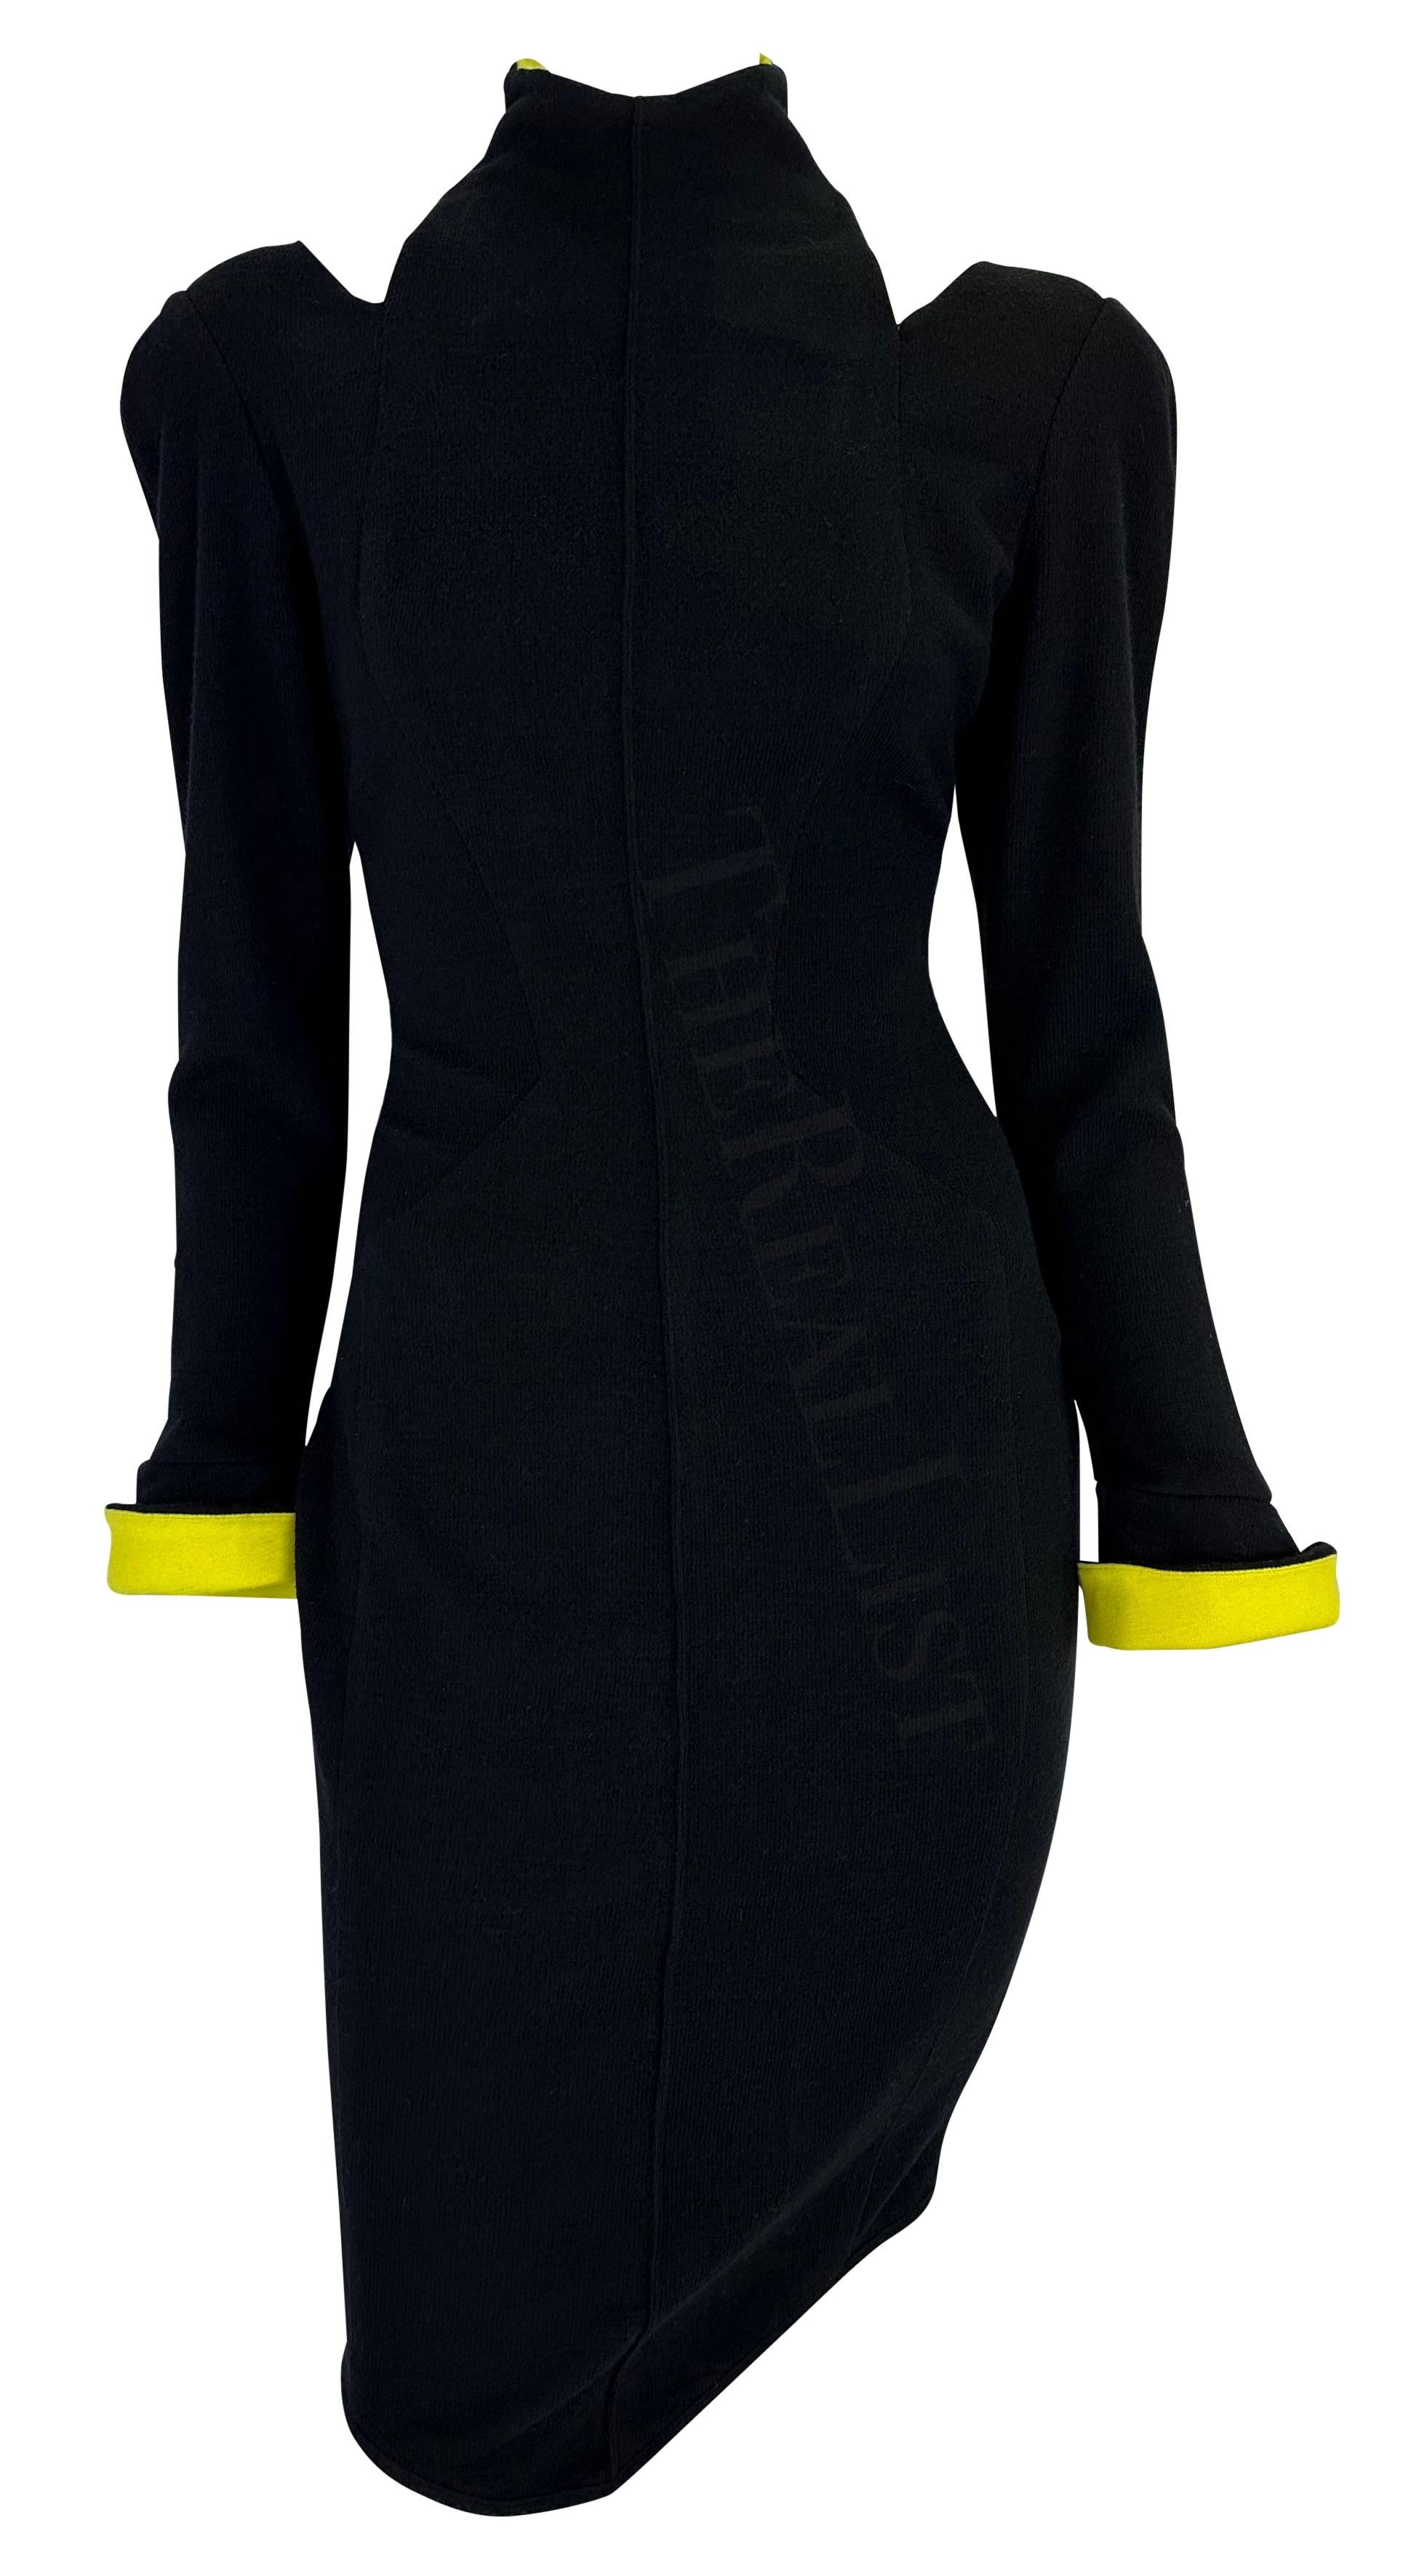 F/W 1988 Thierry Mugler Runway Les Infernales Black Yellow Cut Out Dress 4